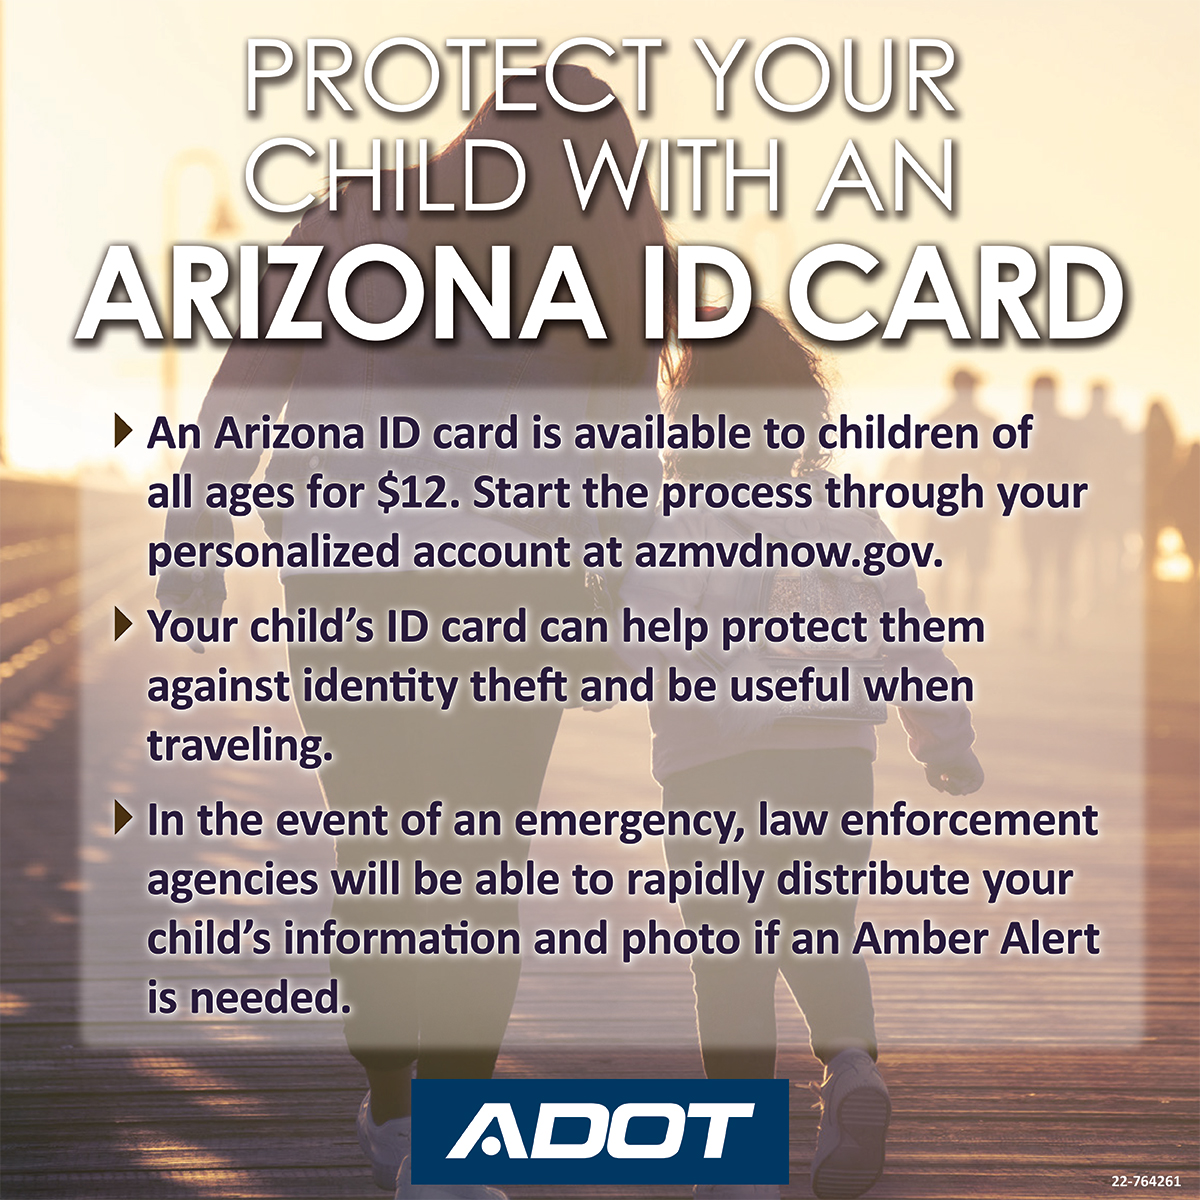 Protect your child with an Arizona ID card